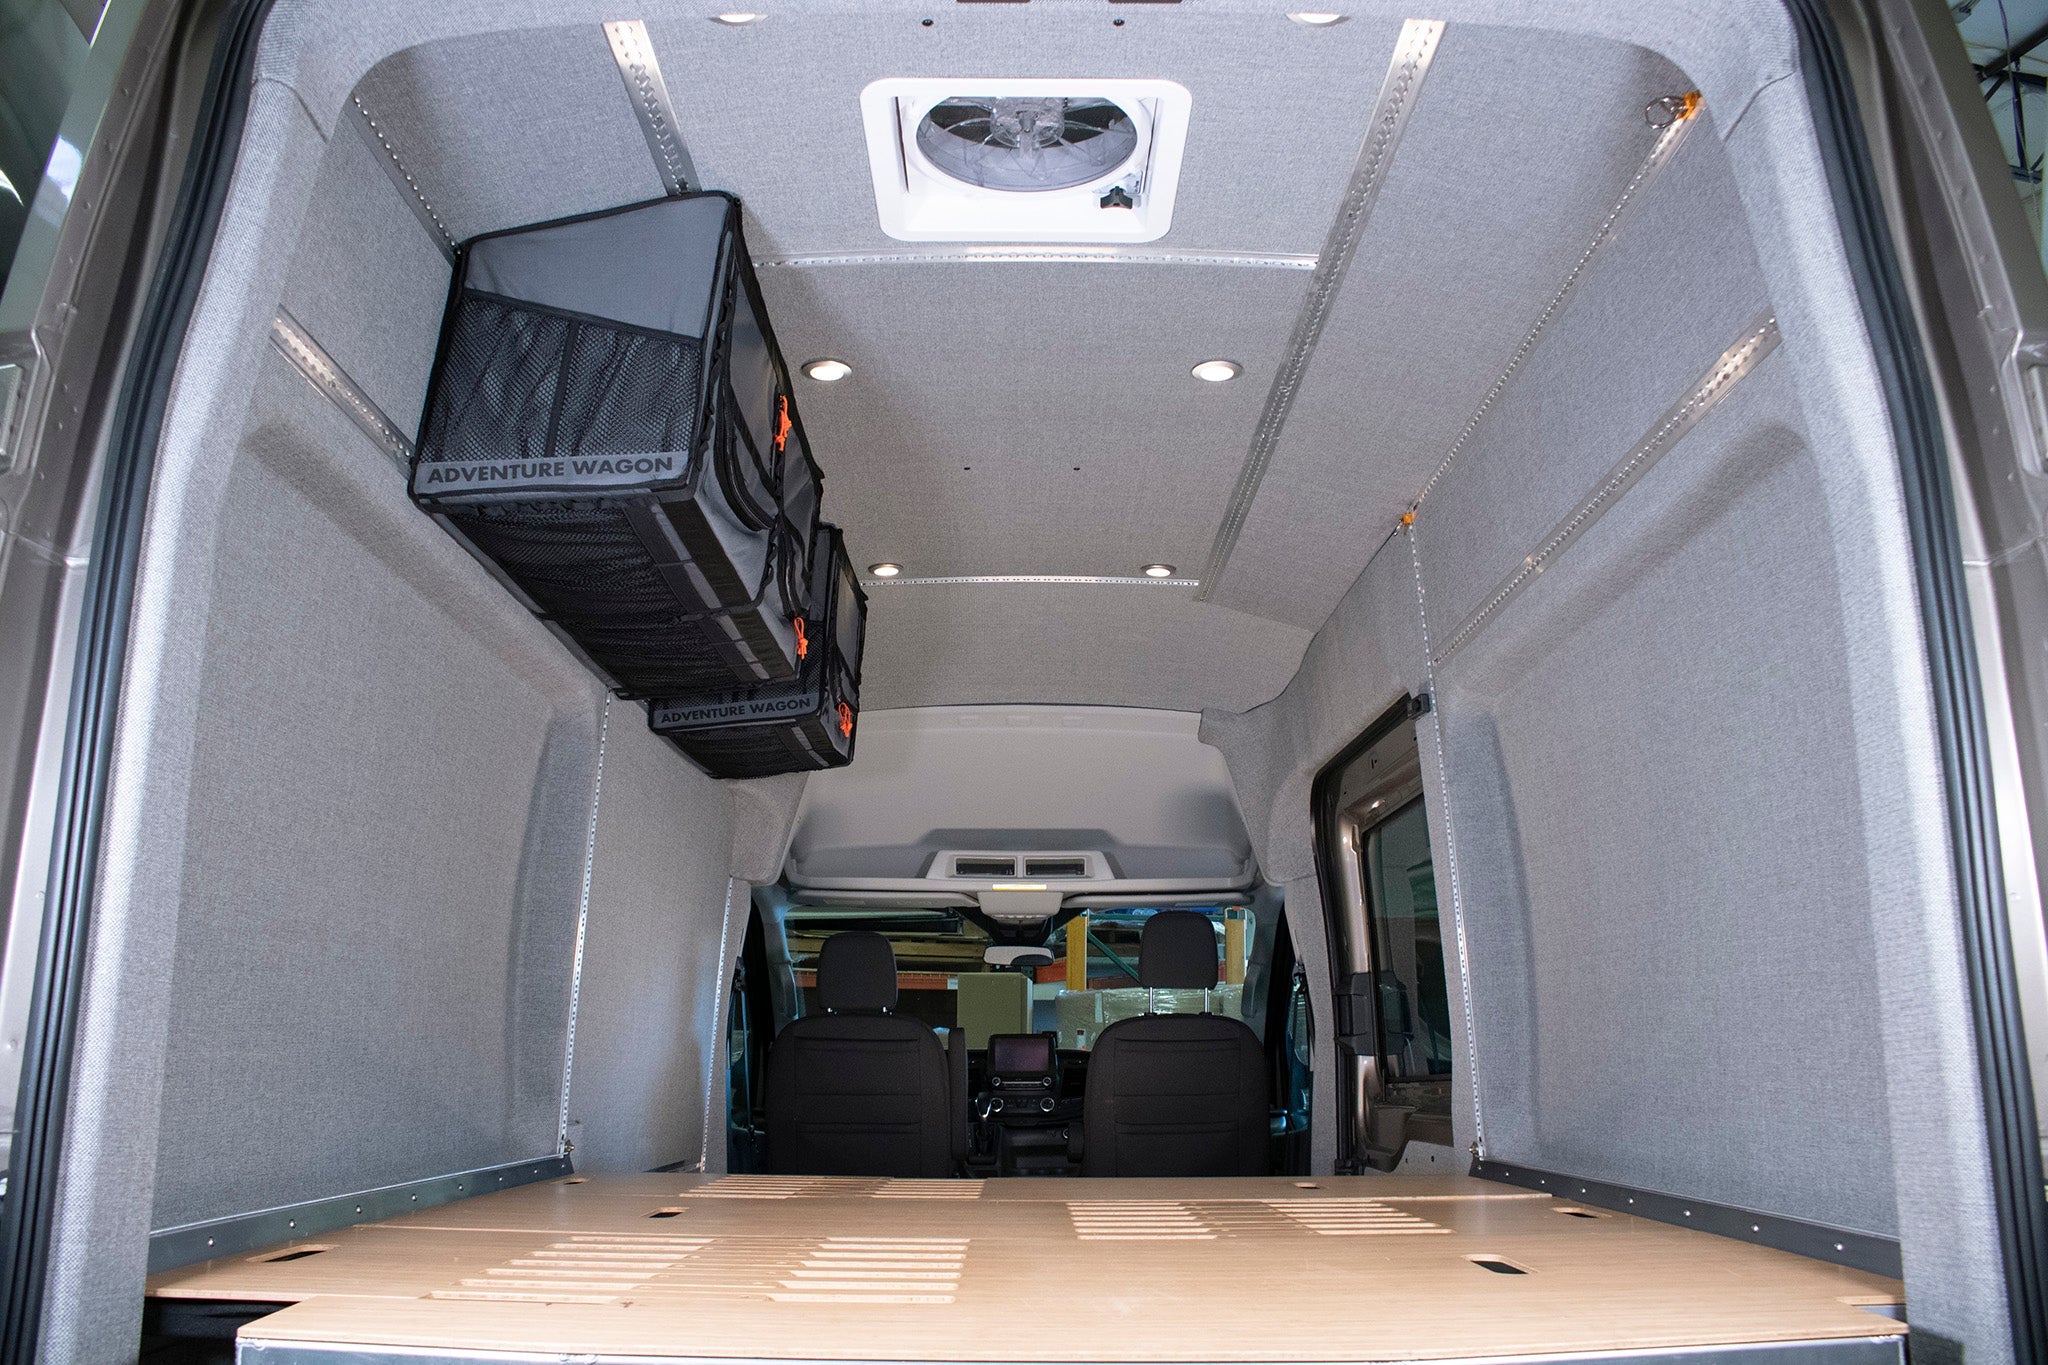 Modular storage systems for vans